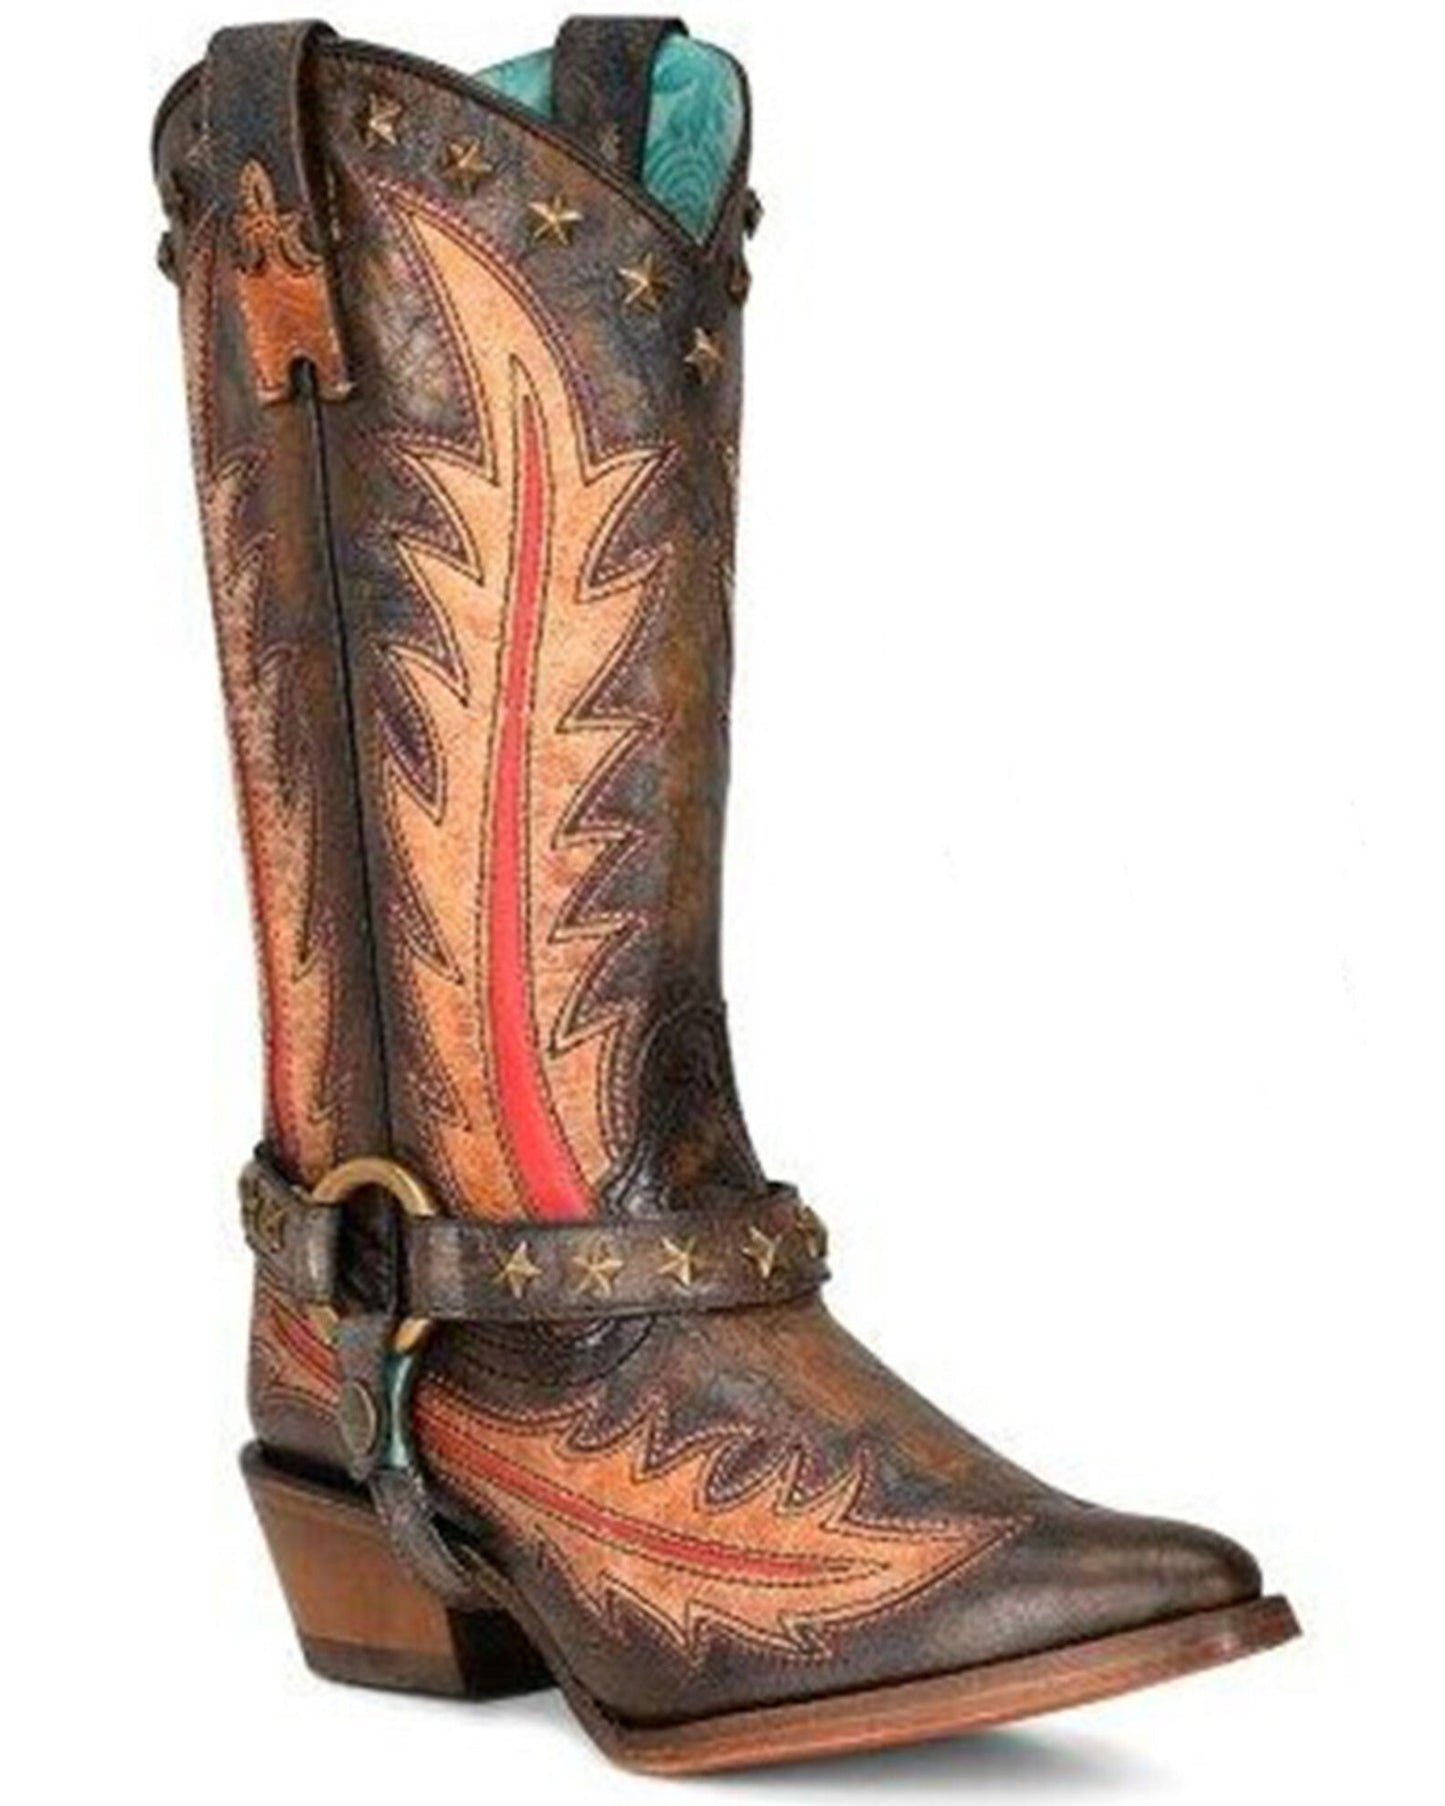 Corral Women's Star Studded and Harness Western Boot - Pointed Toe C3945